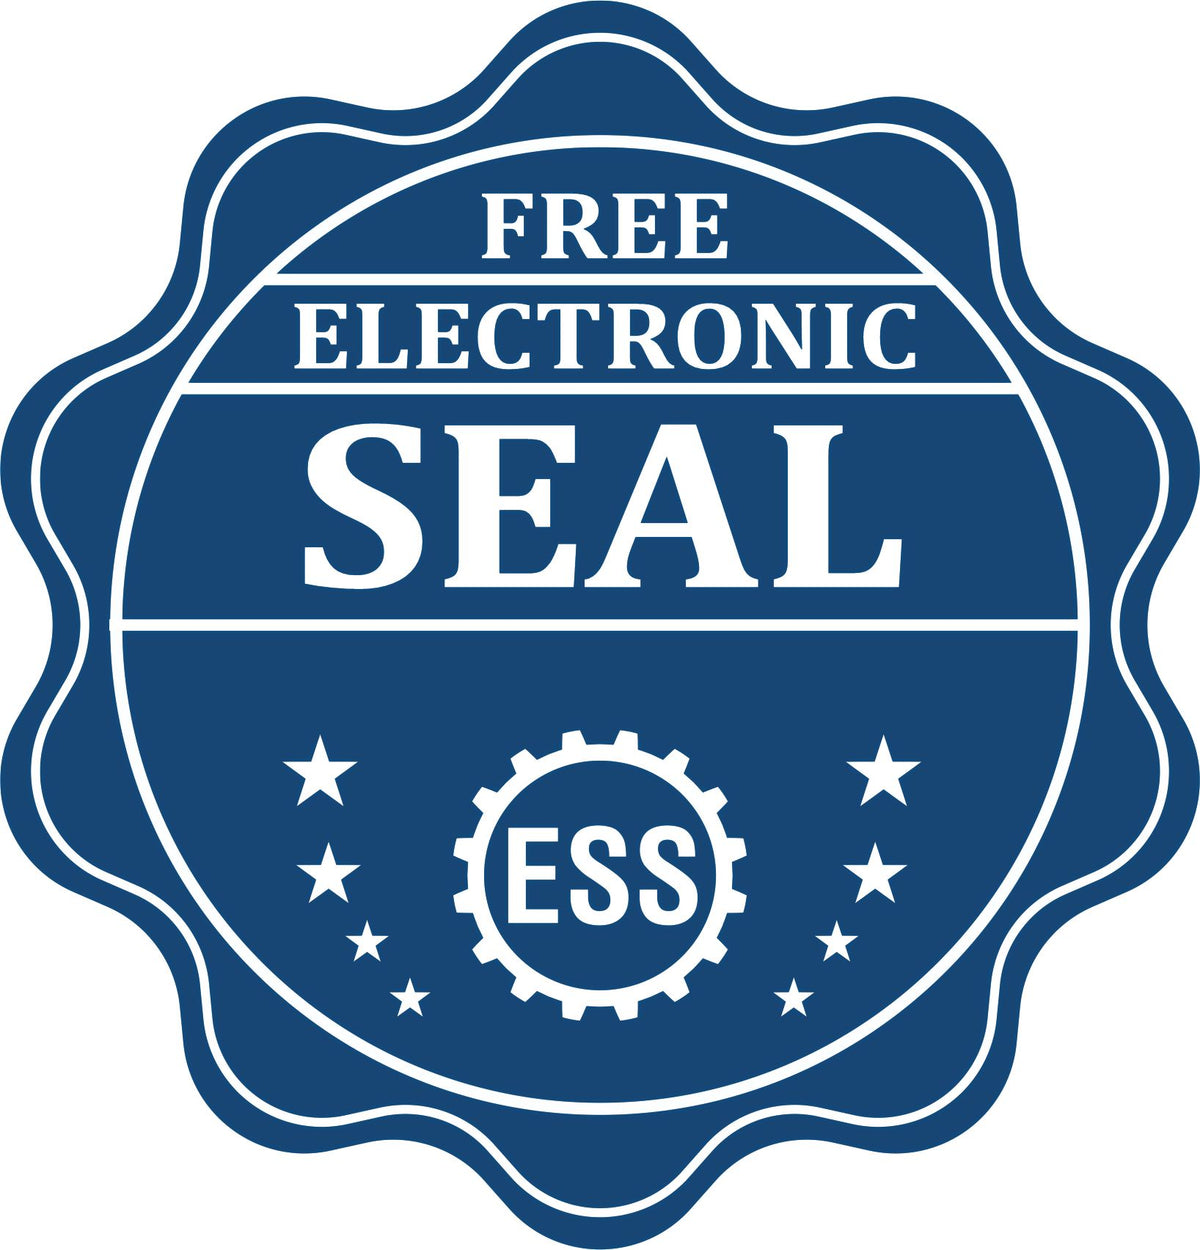 A badge showing a free electronic seal for the Heavy Duty Cast Iron New Hampshire Geologist Seal Embosser with stars and the ESS gear on the emblem.